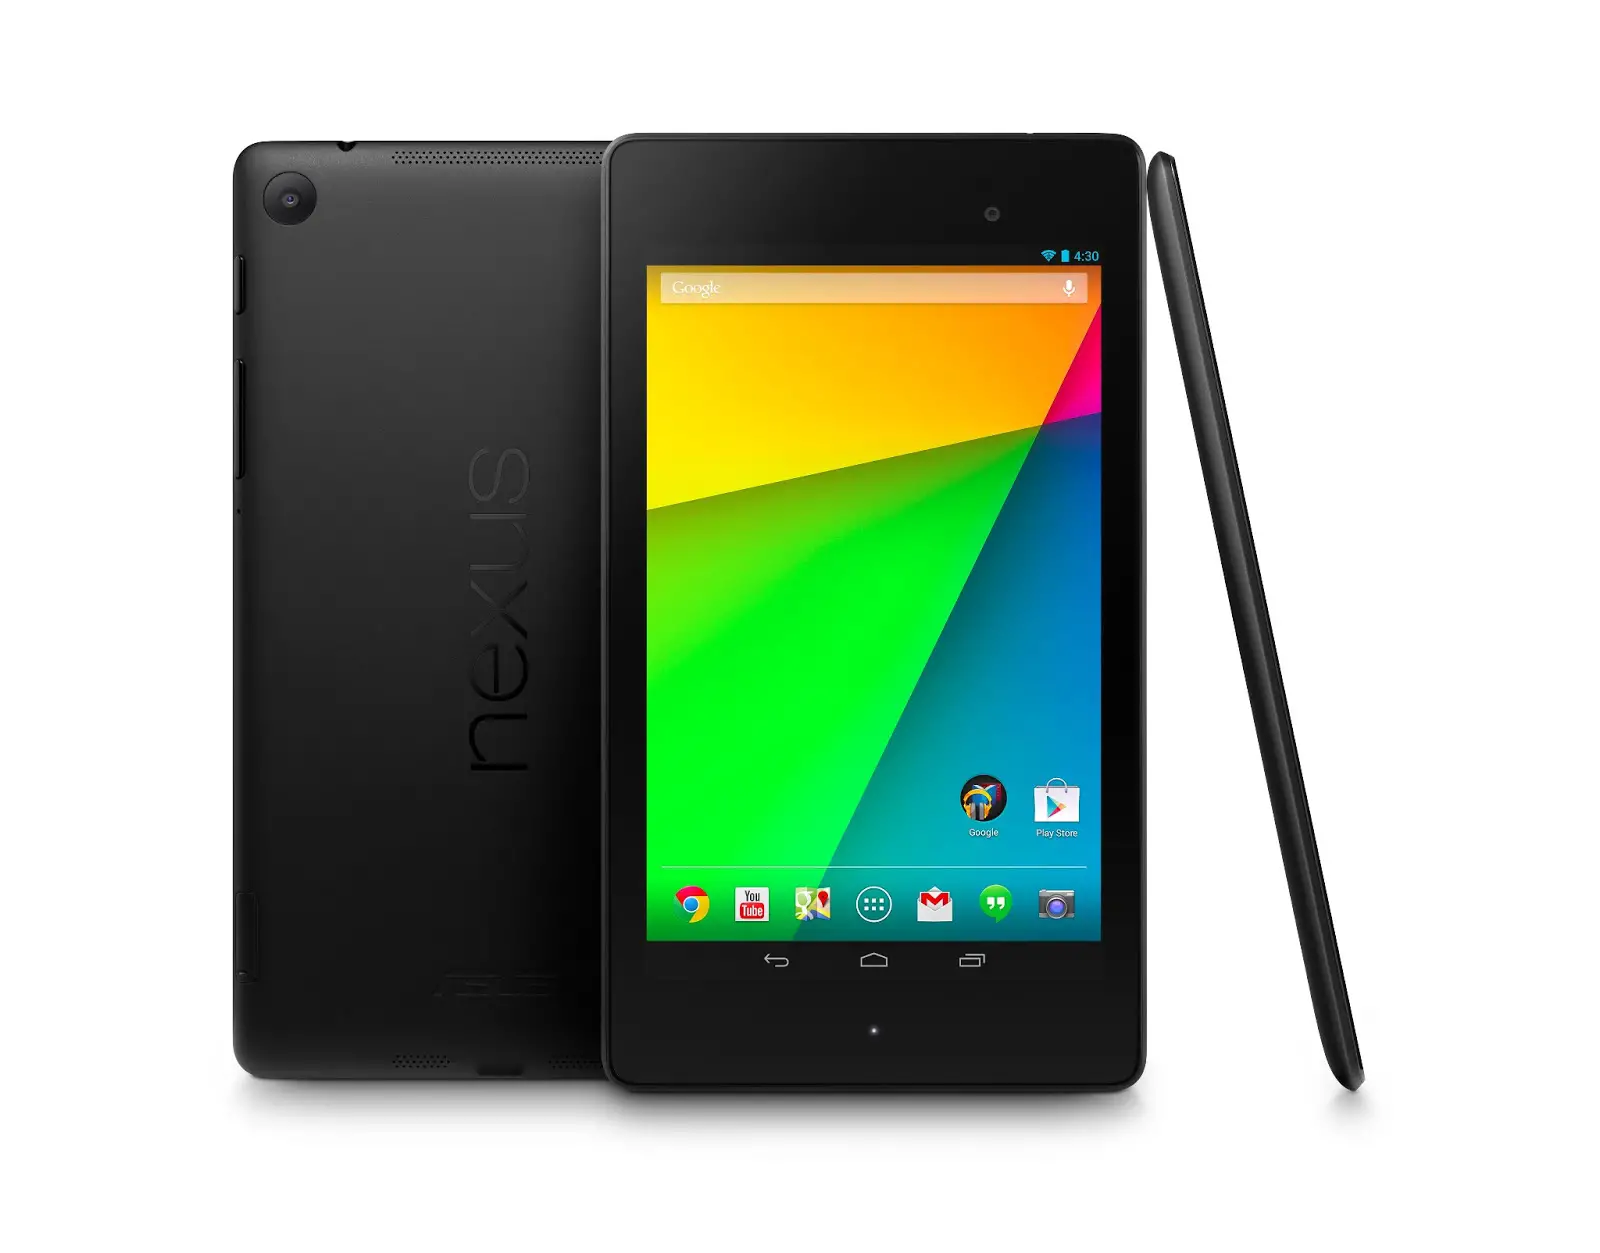 Nexus 7 2013 - for some reason we don't have an alt tag here